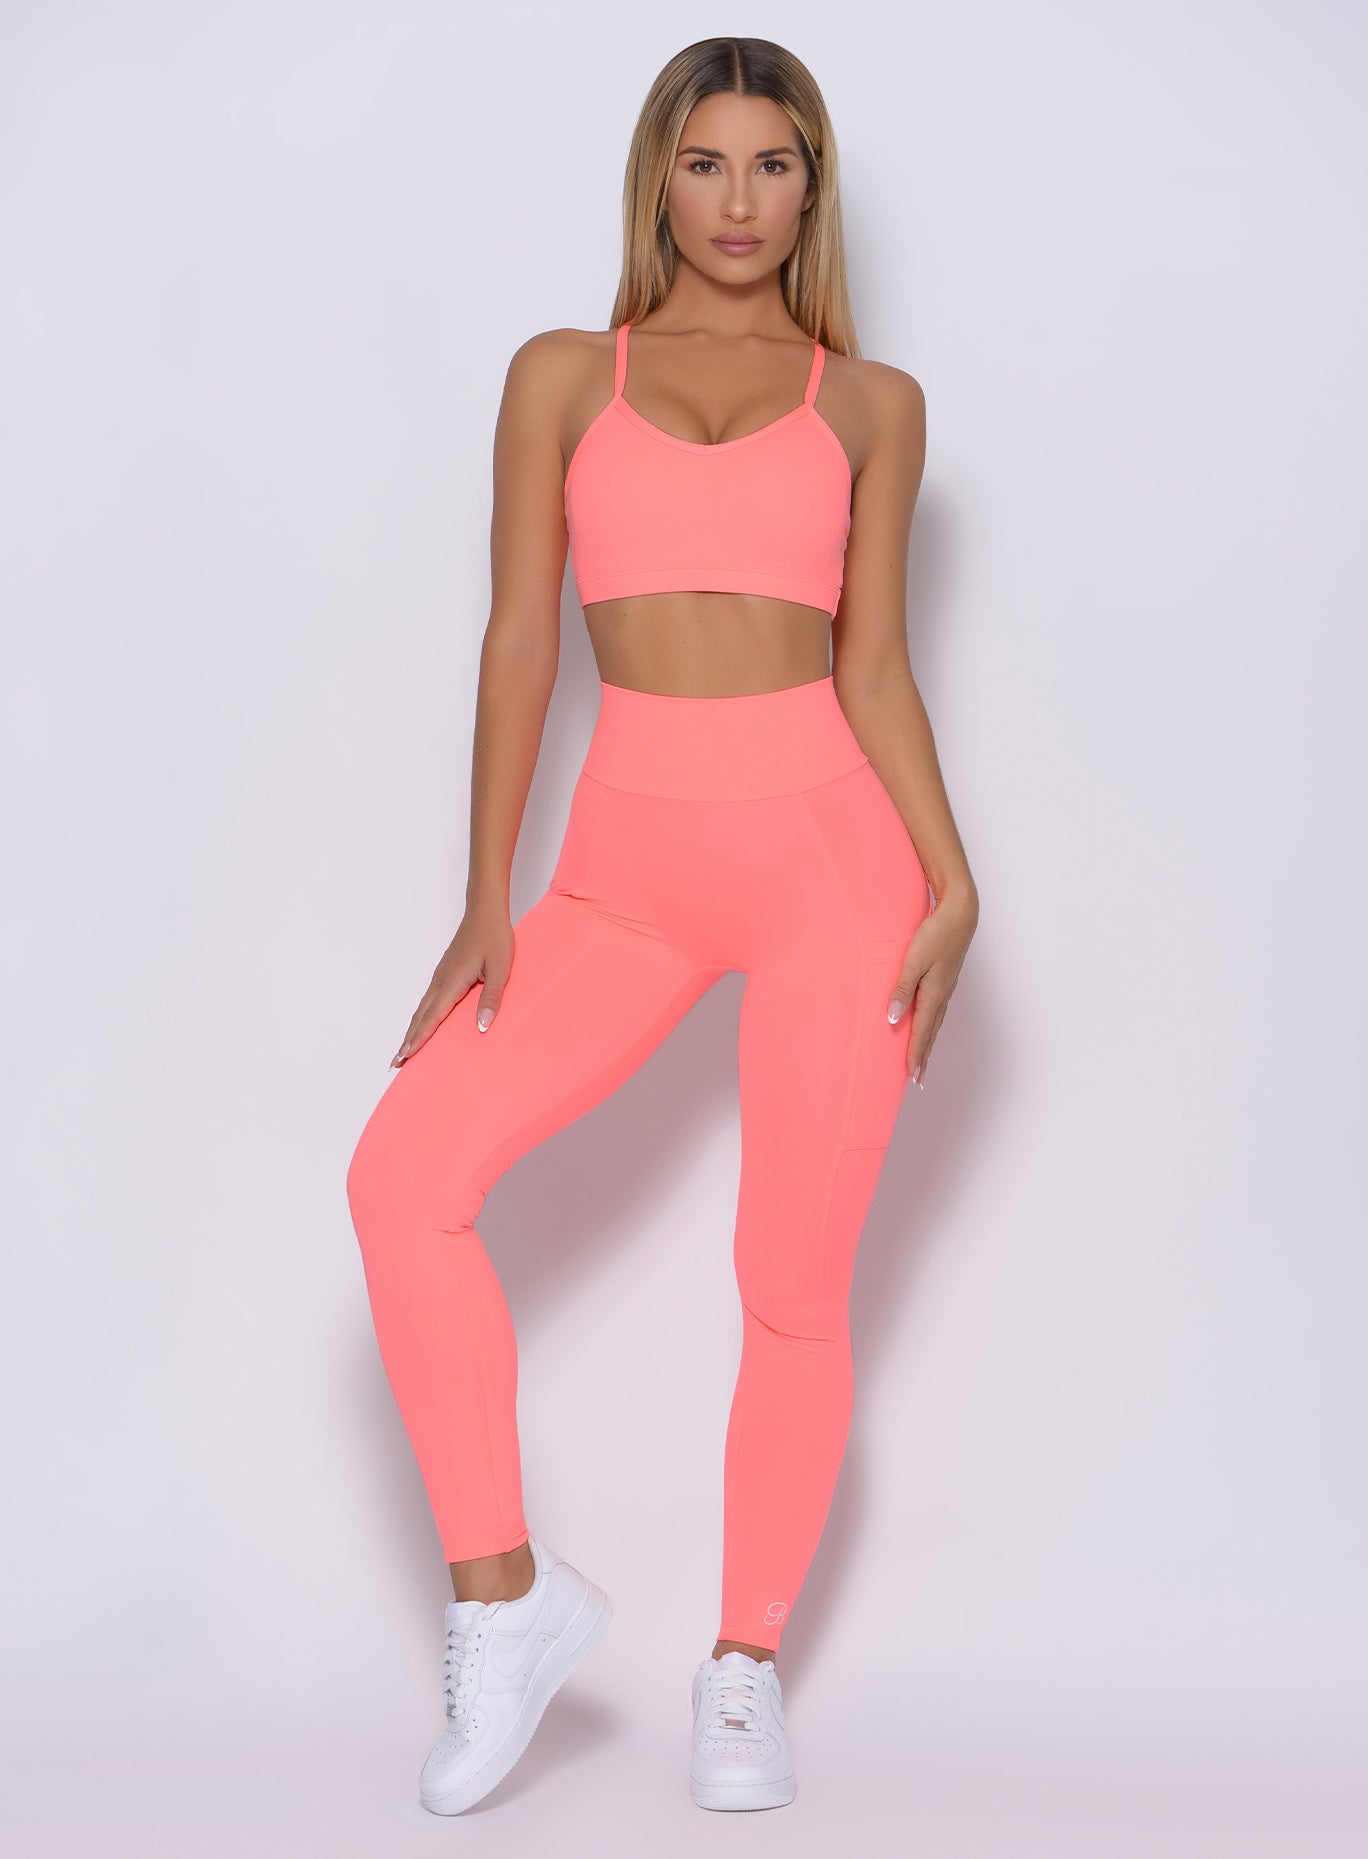 Model facing forward wearing our pumped sports bra in wild peach color and a matching leggings